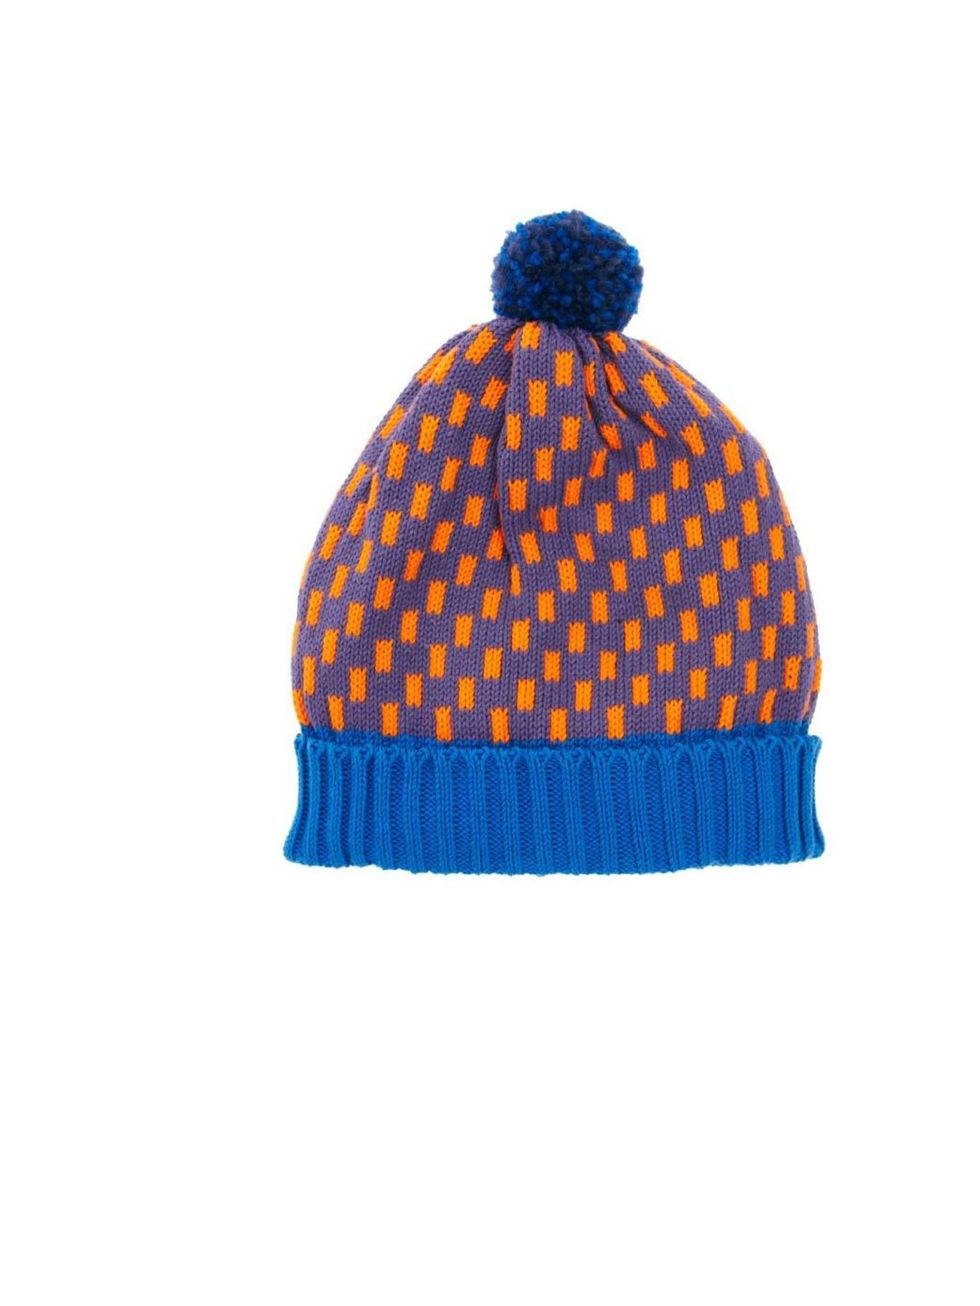 <p>ALL Knitwear bobble hat, £45, available at <a href="http://www.asos.com/All-Knitwear/All-Knitwear-Royal-Dash-Bobble-Hat/Prod/pgeproduct.aspx?iid=2497260&cid=6449&sh=0&pge=0&pgesize=-1&sort=-1&clr=Blue+multi">ASOS</a></p>